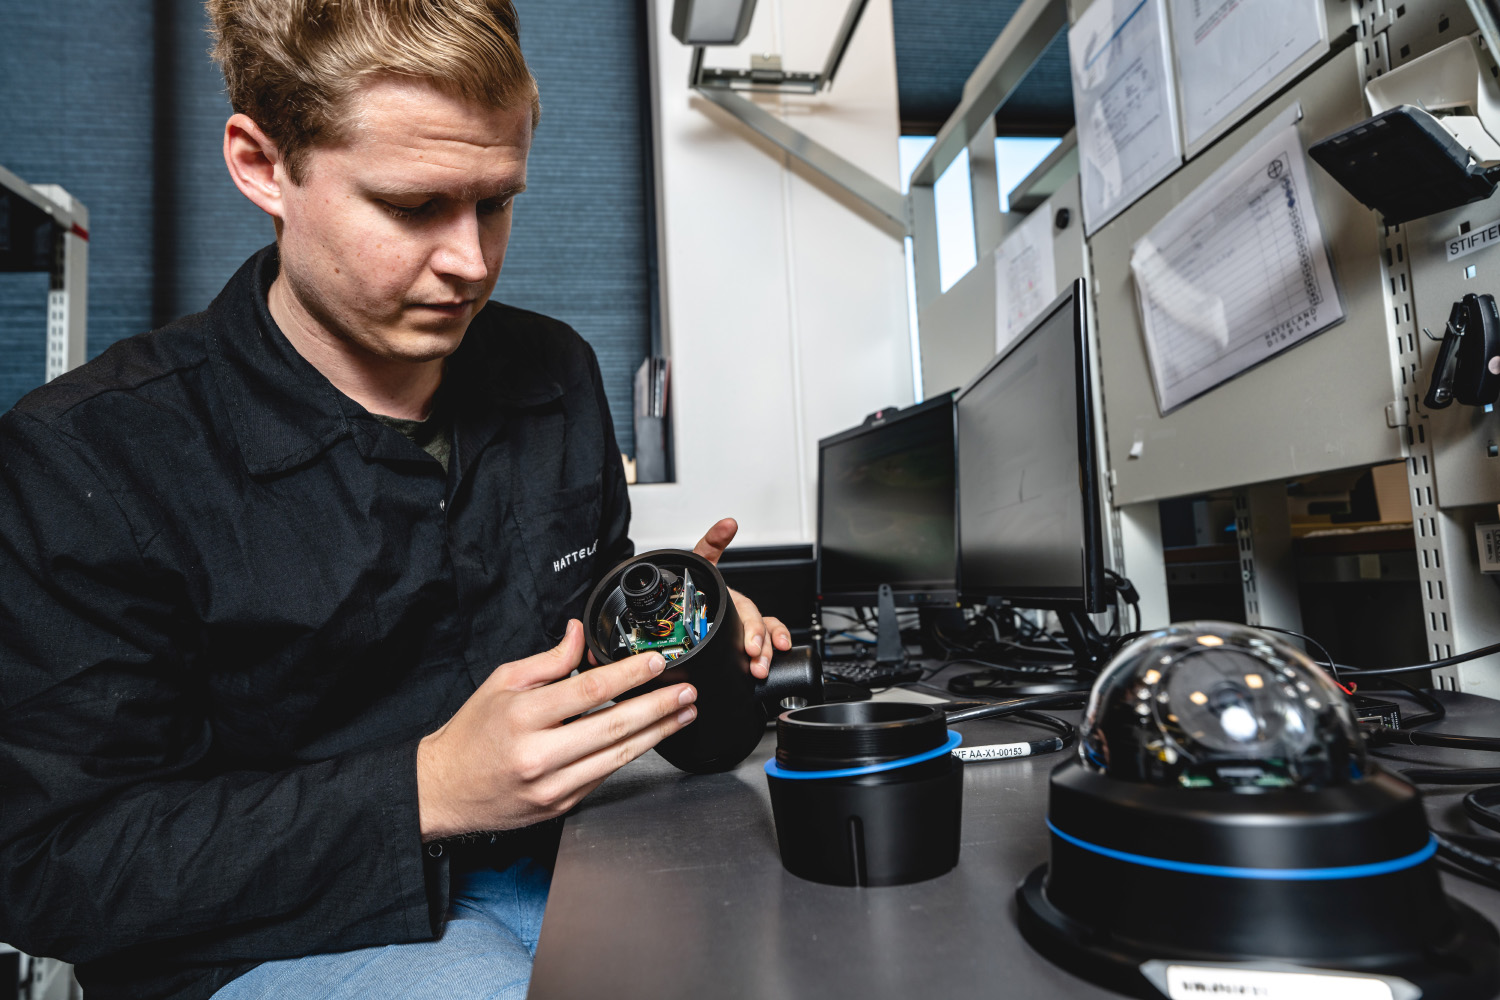 A Hatteland Technology technician is assembling a SeaHawk bullet camera, a rugged CCTV camera for maritime applications. He is wearing a black shirt and blue jeans. Even closer to the camera is a Hatteland Technology SeaHawk dome camera.